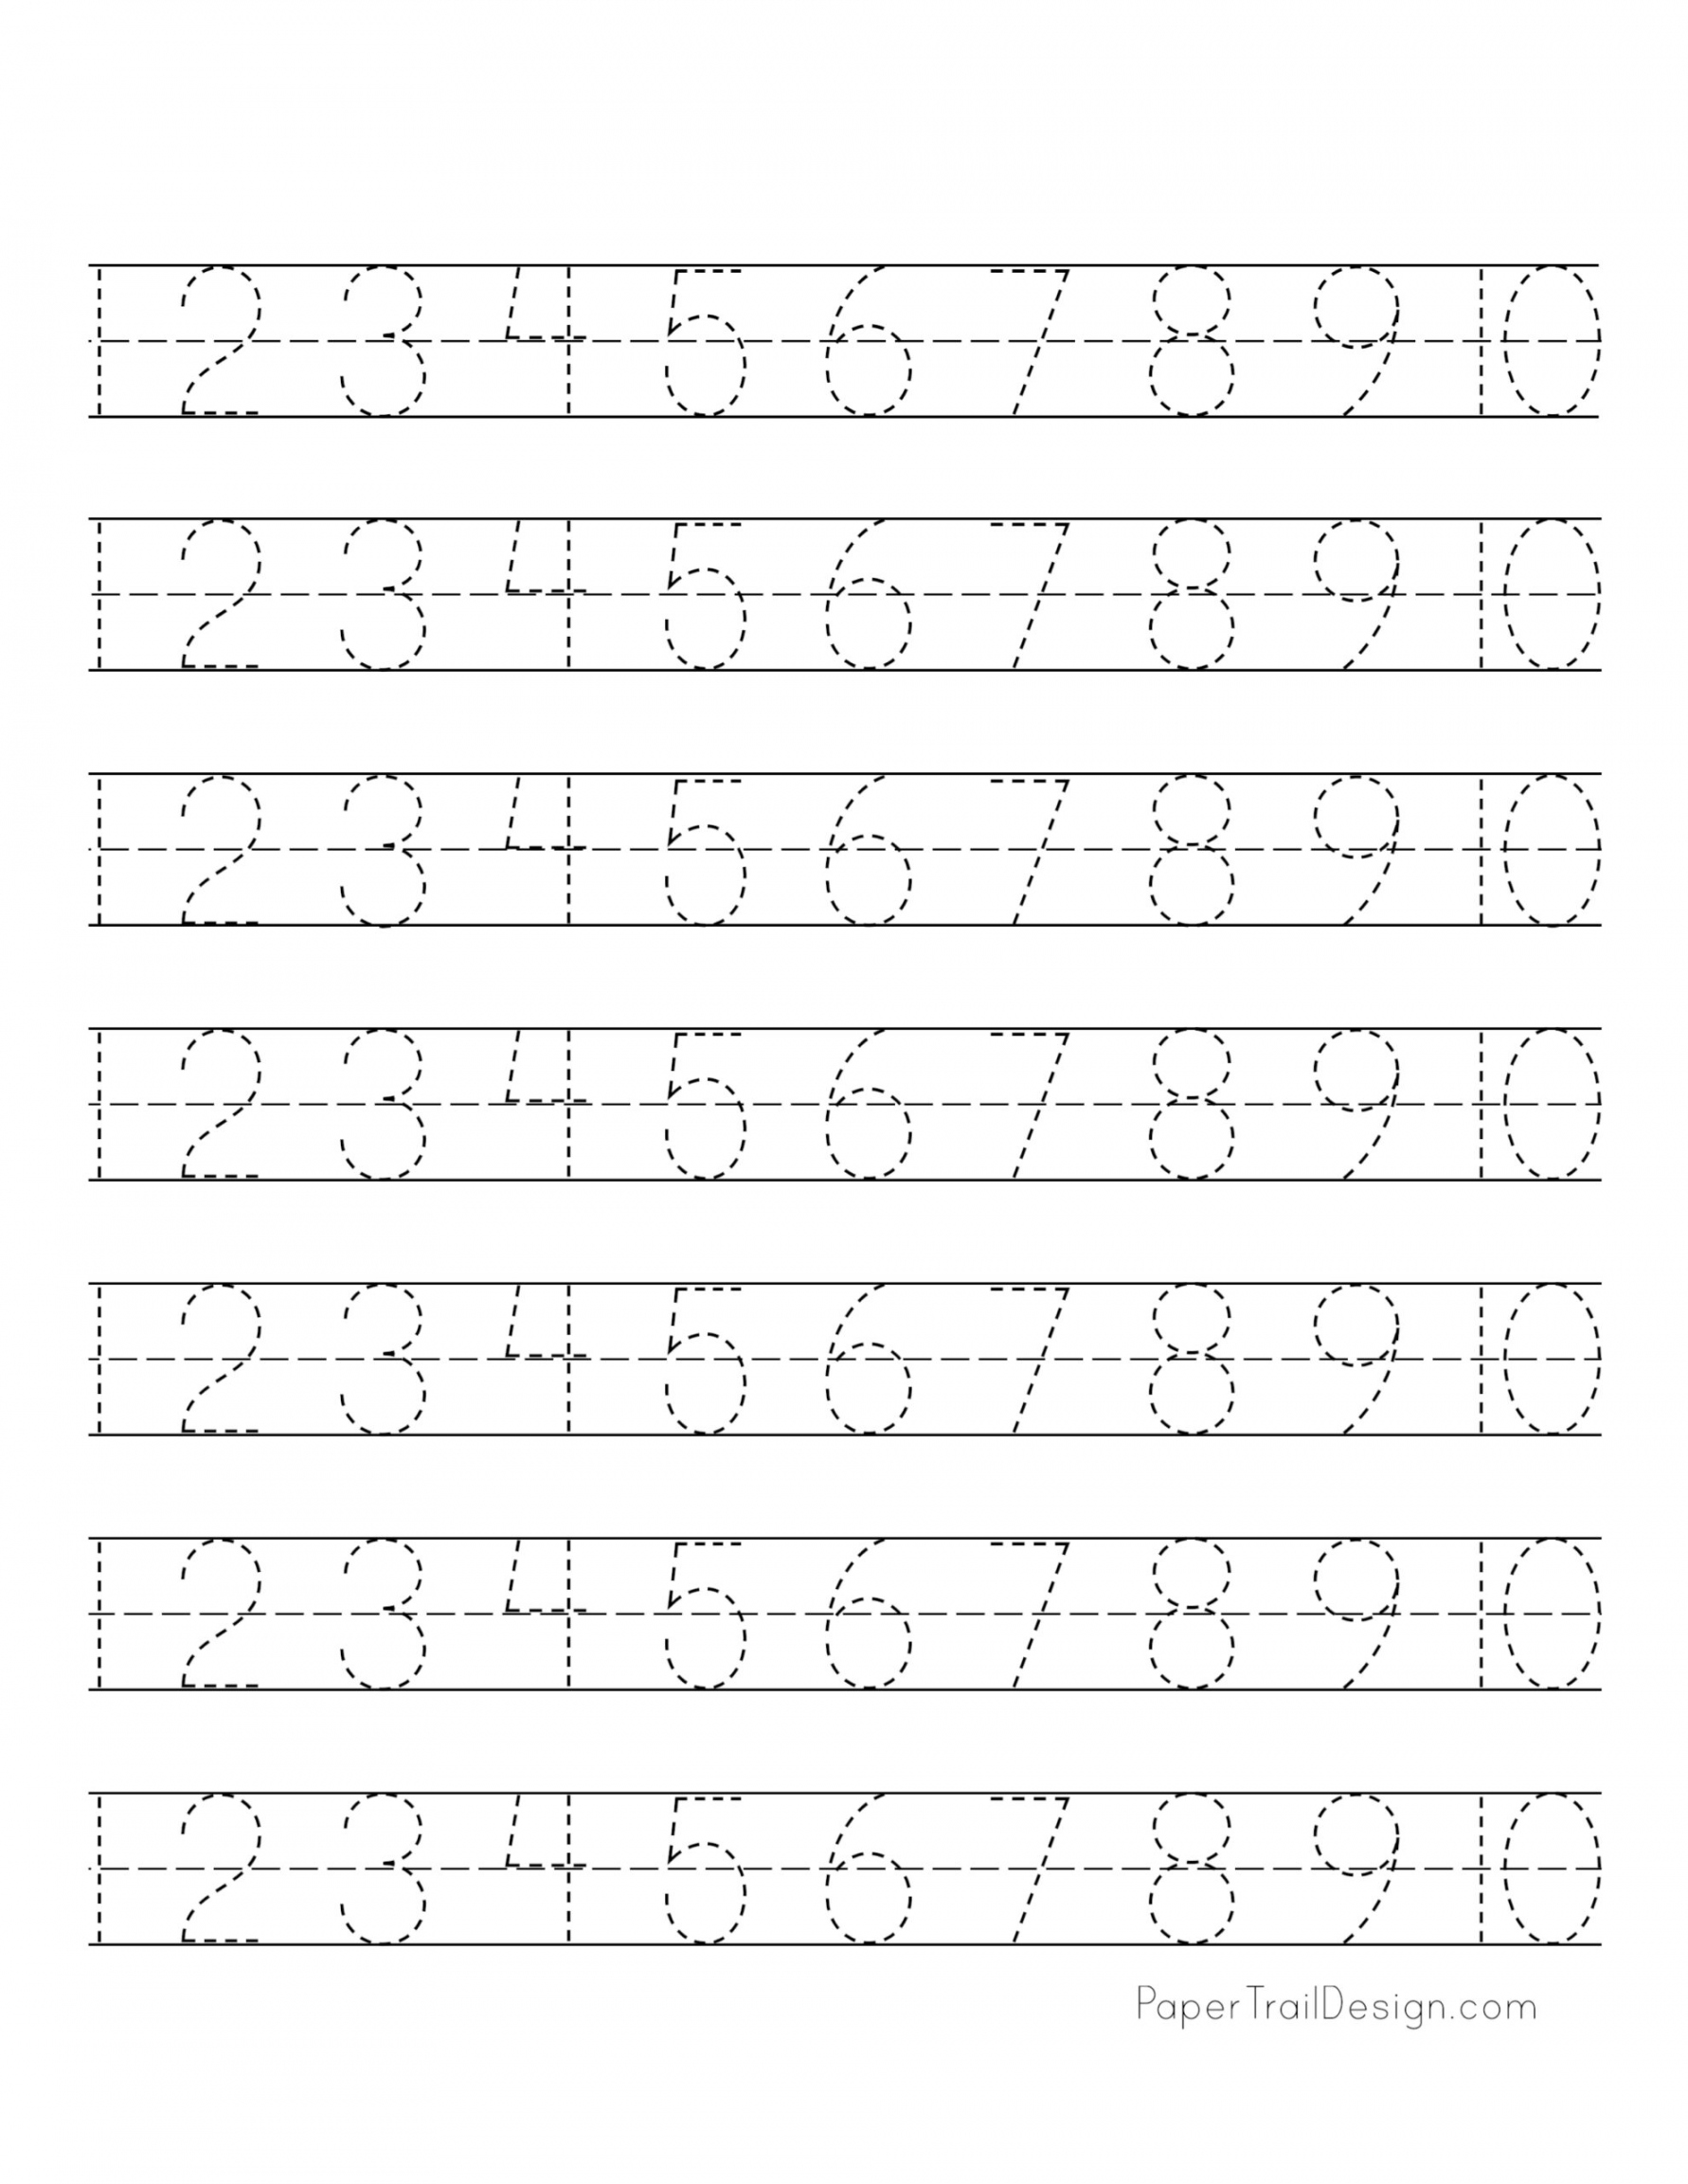 Free Number Tracing Worksheets - Paper Trail Design - FREE Printables - Free Printable Number Tracing